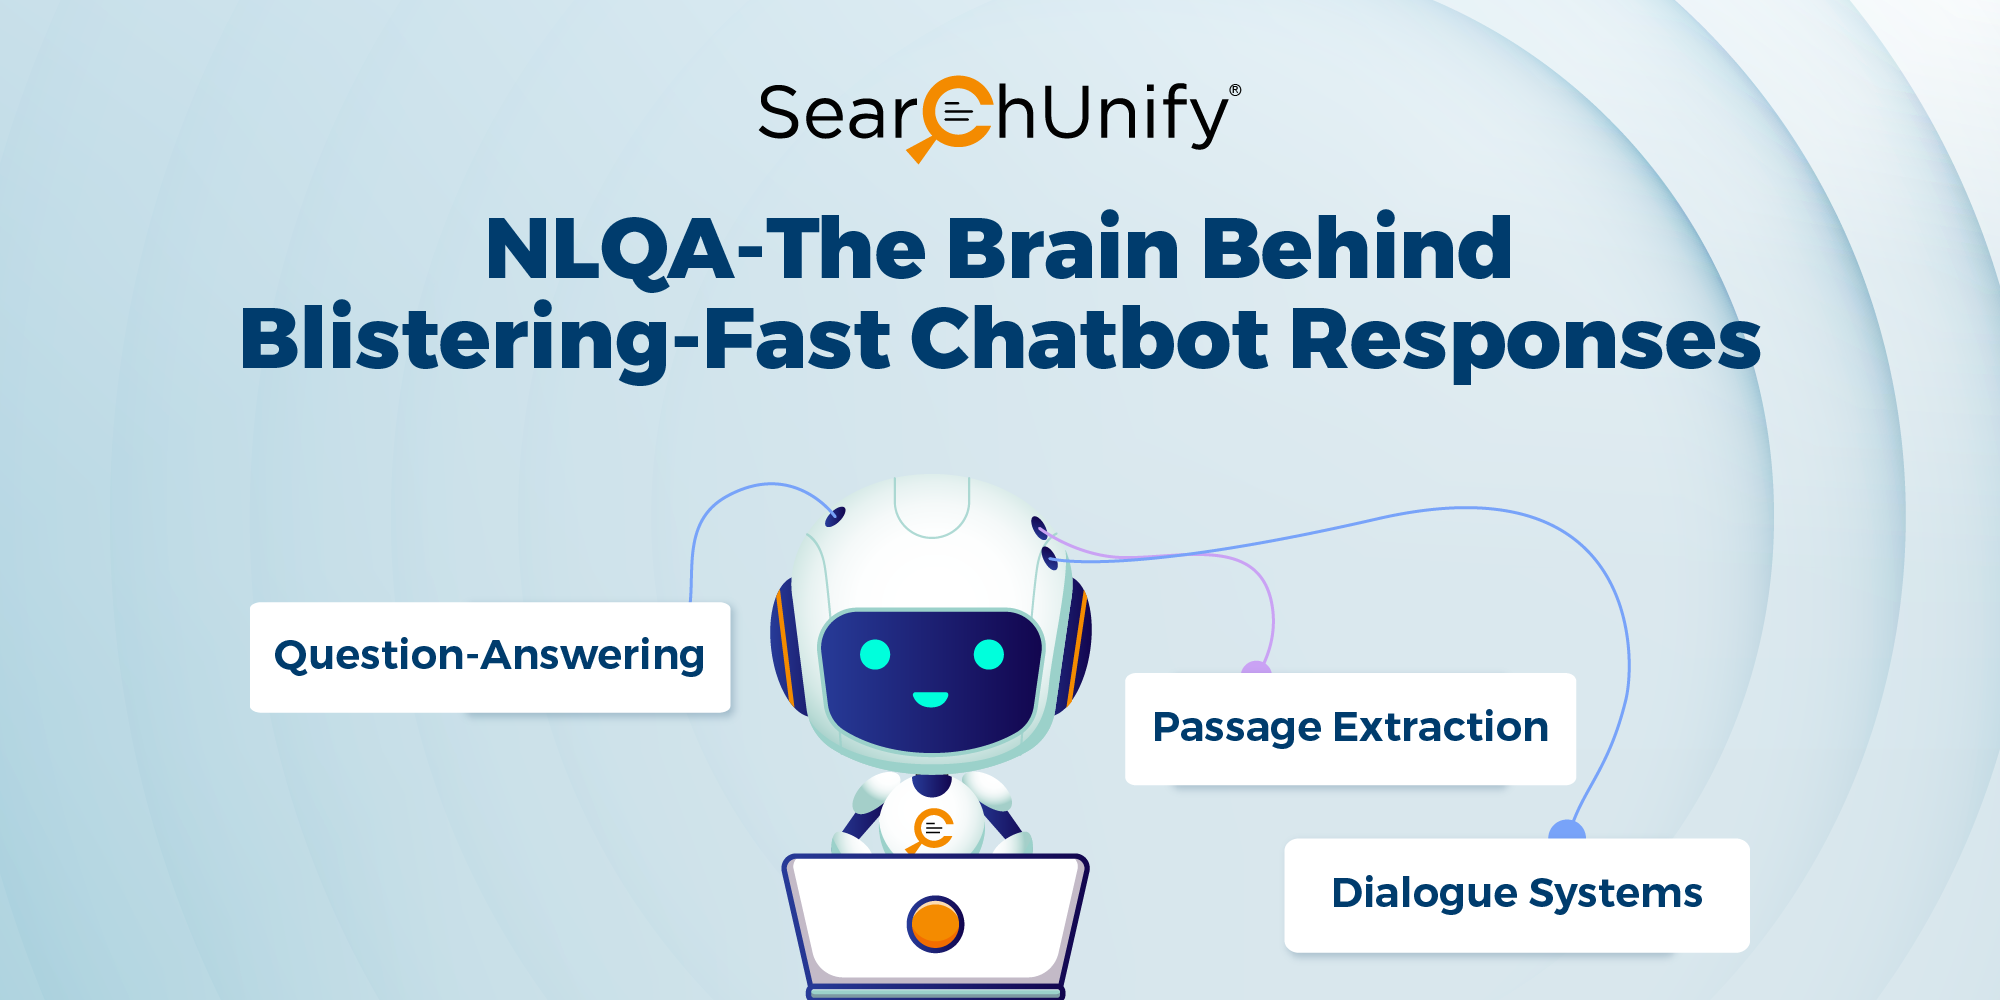 NLQA- The Brain Behind Blistering-Fast Chatbot Responses